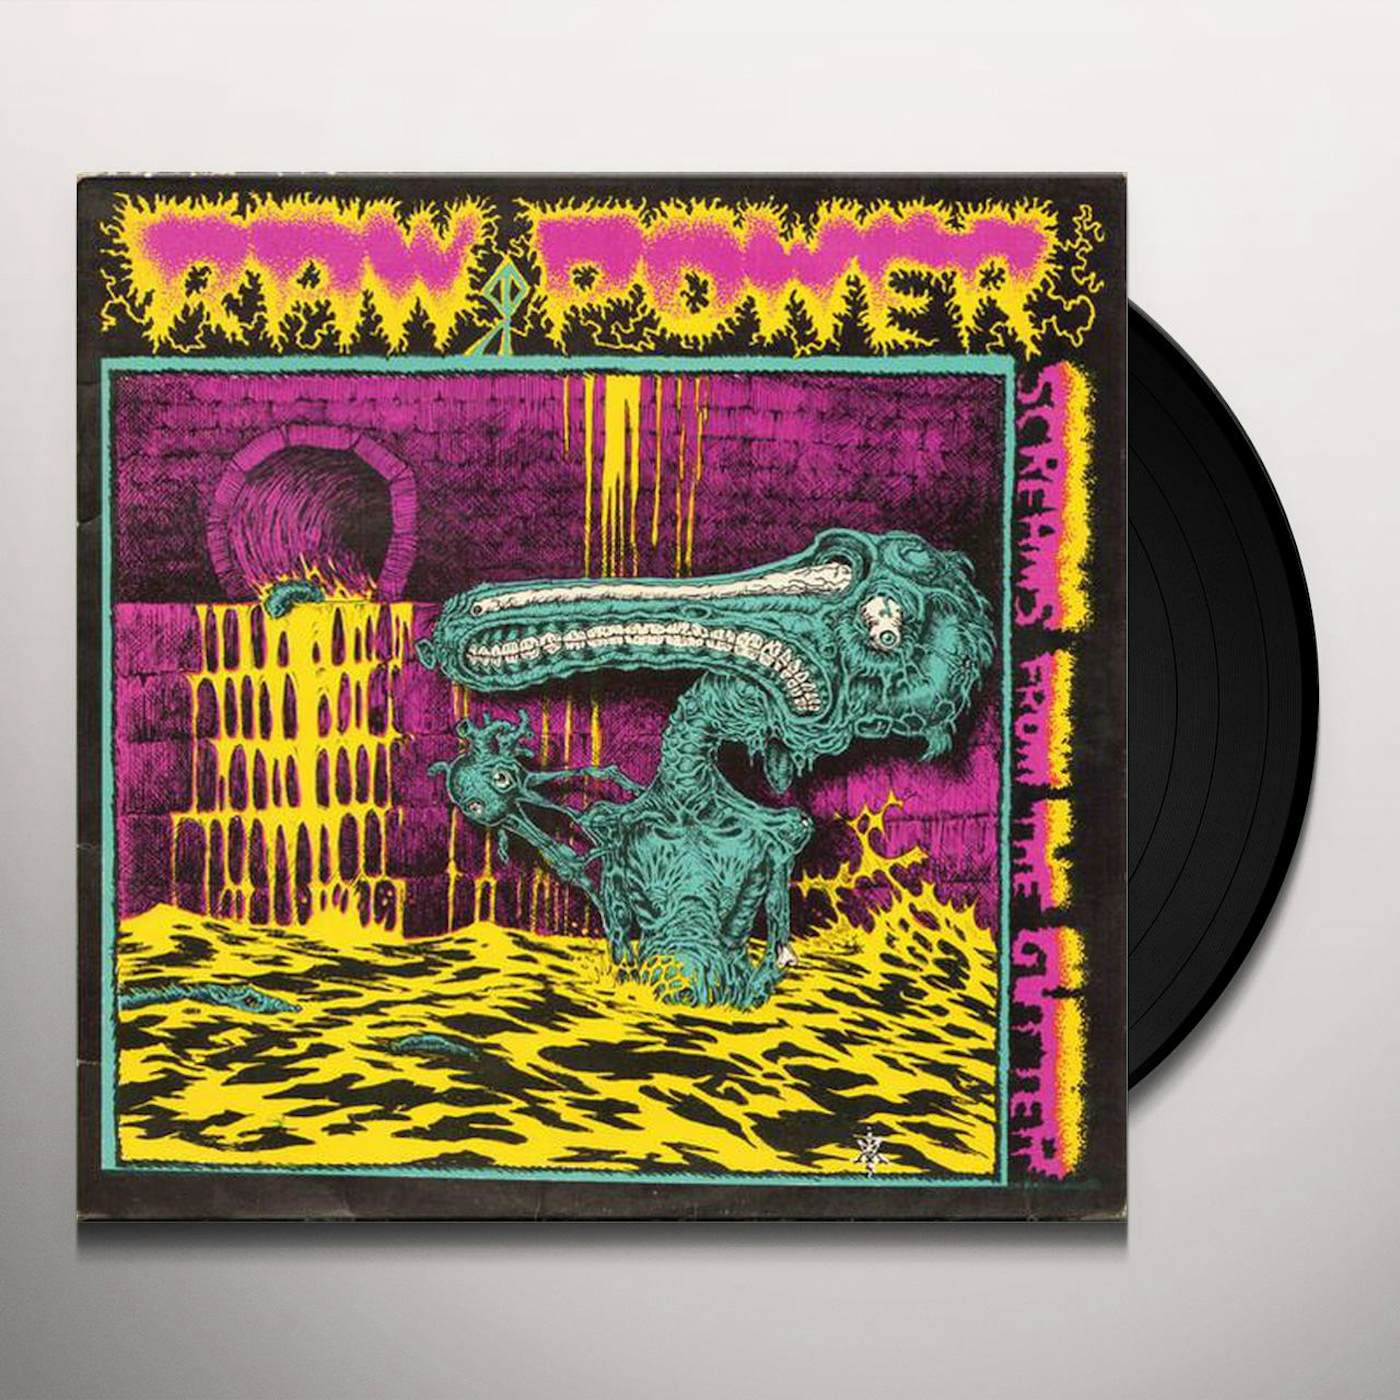 Raw Power SCREAMS FROM THE GUTTER: 35TH ANNIVERSARY Vinyl Record